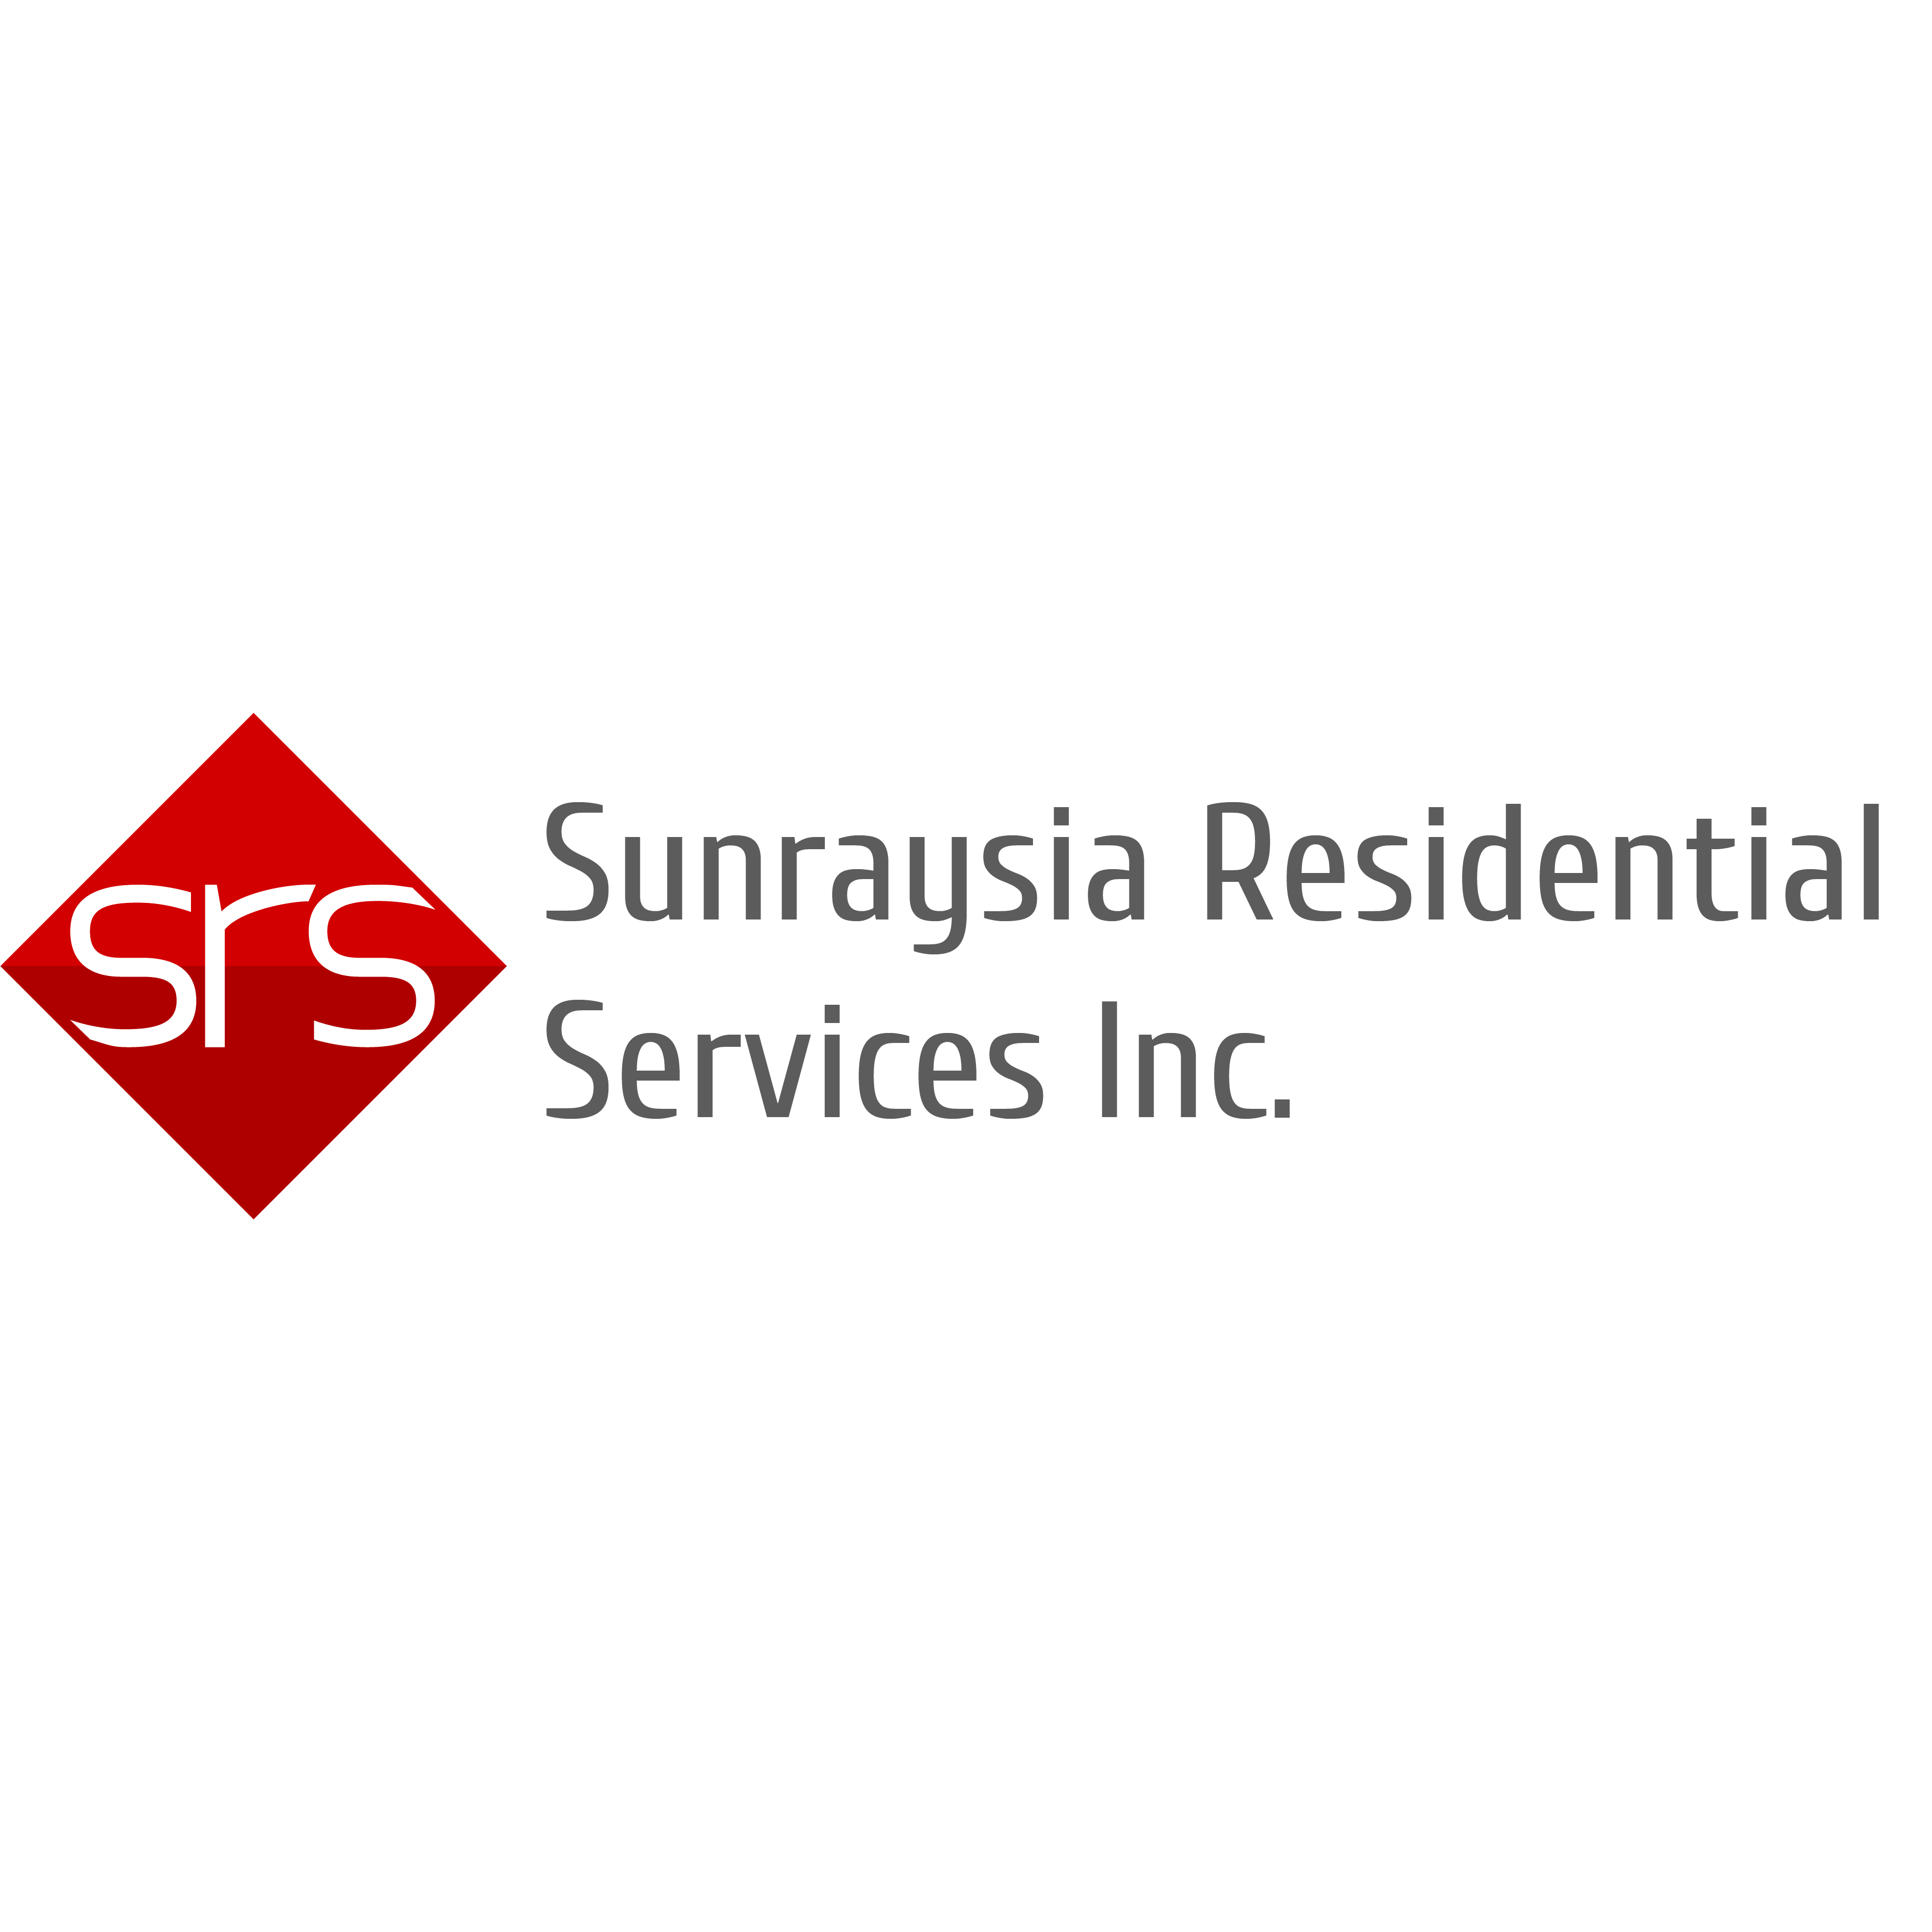 Sunraysia Residential Services Inc. SRS Logo